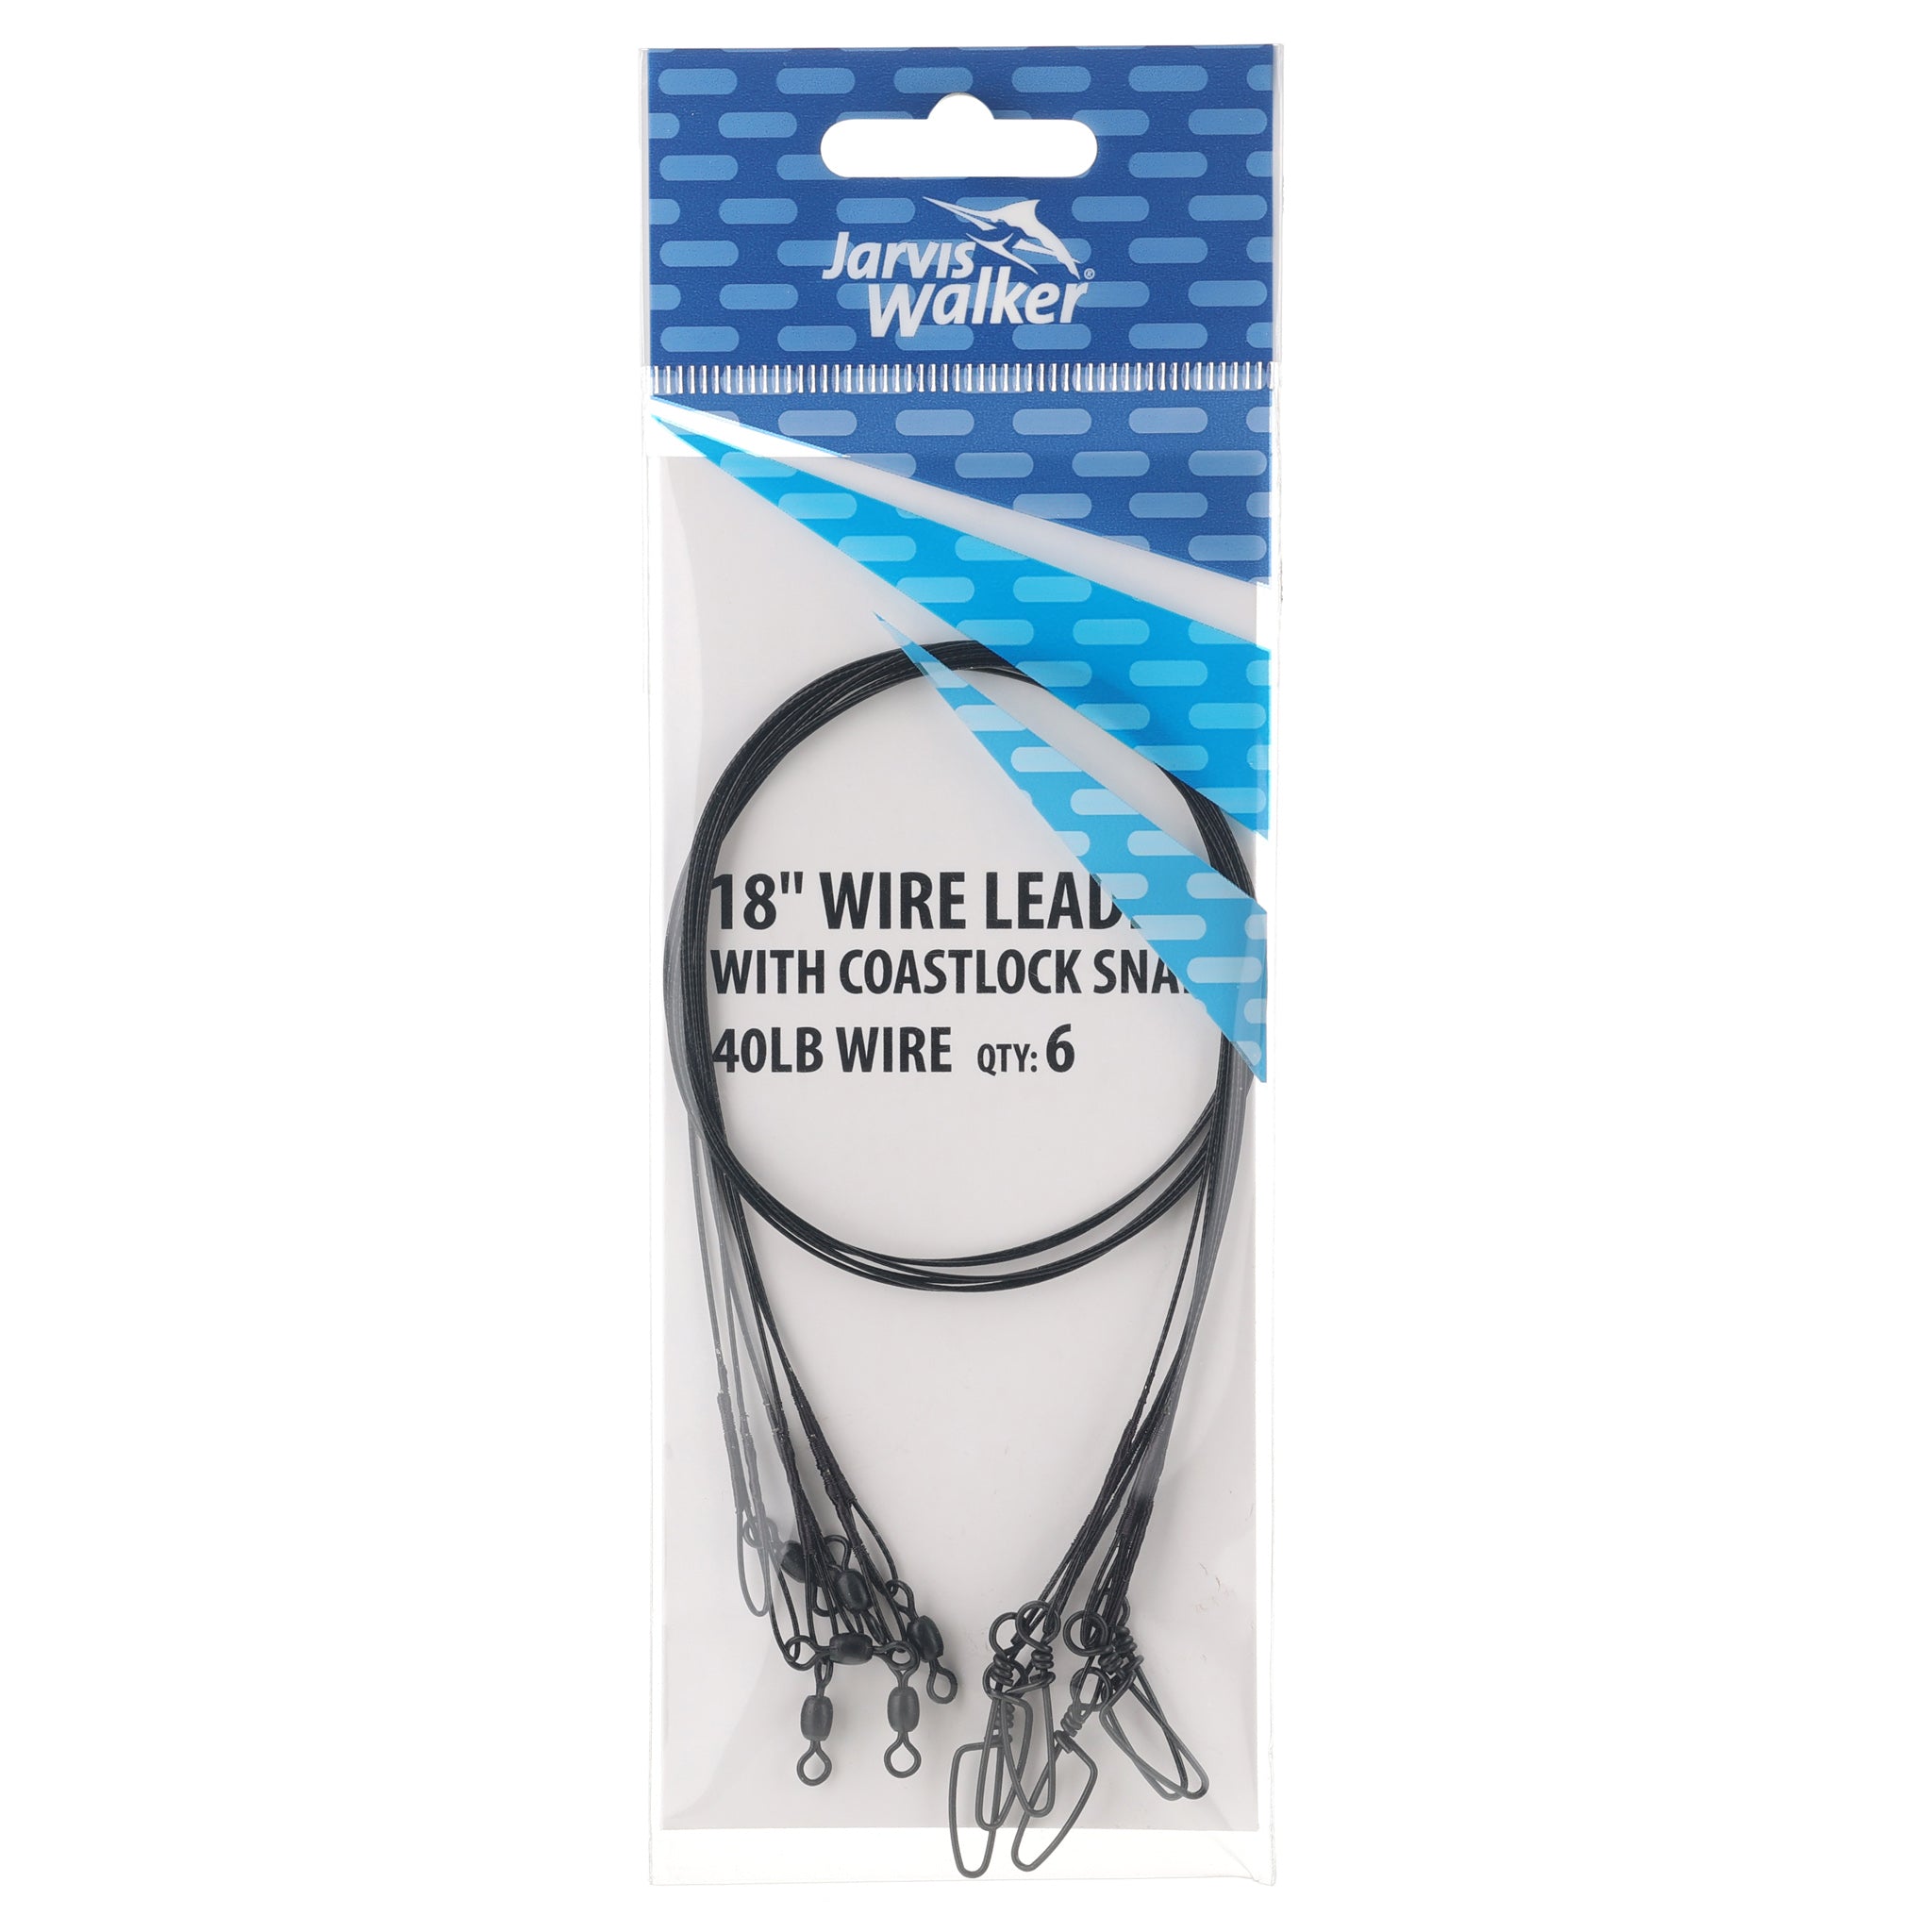 100LB Heavy Duty Fishing Stainless Steel Wire Leaders with